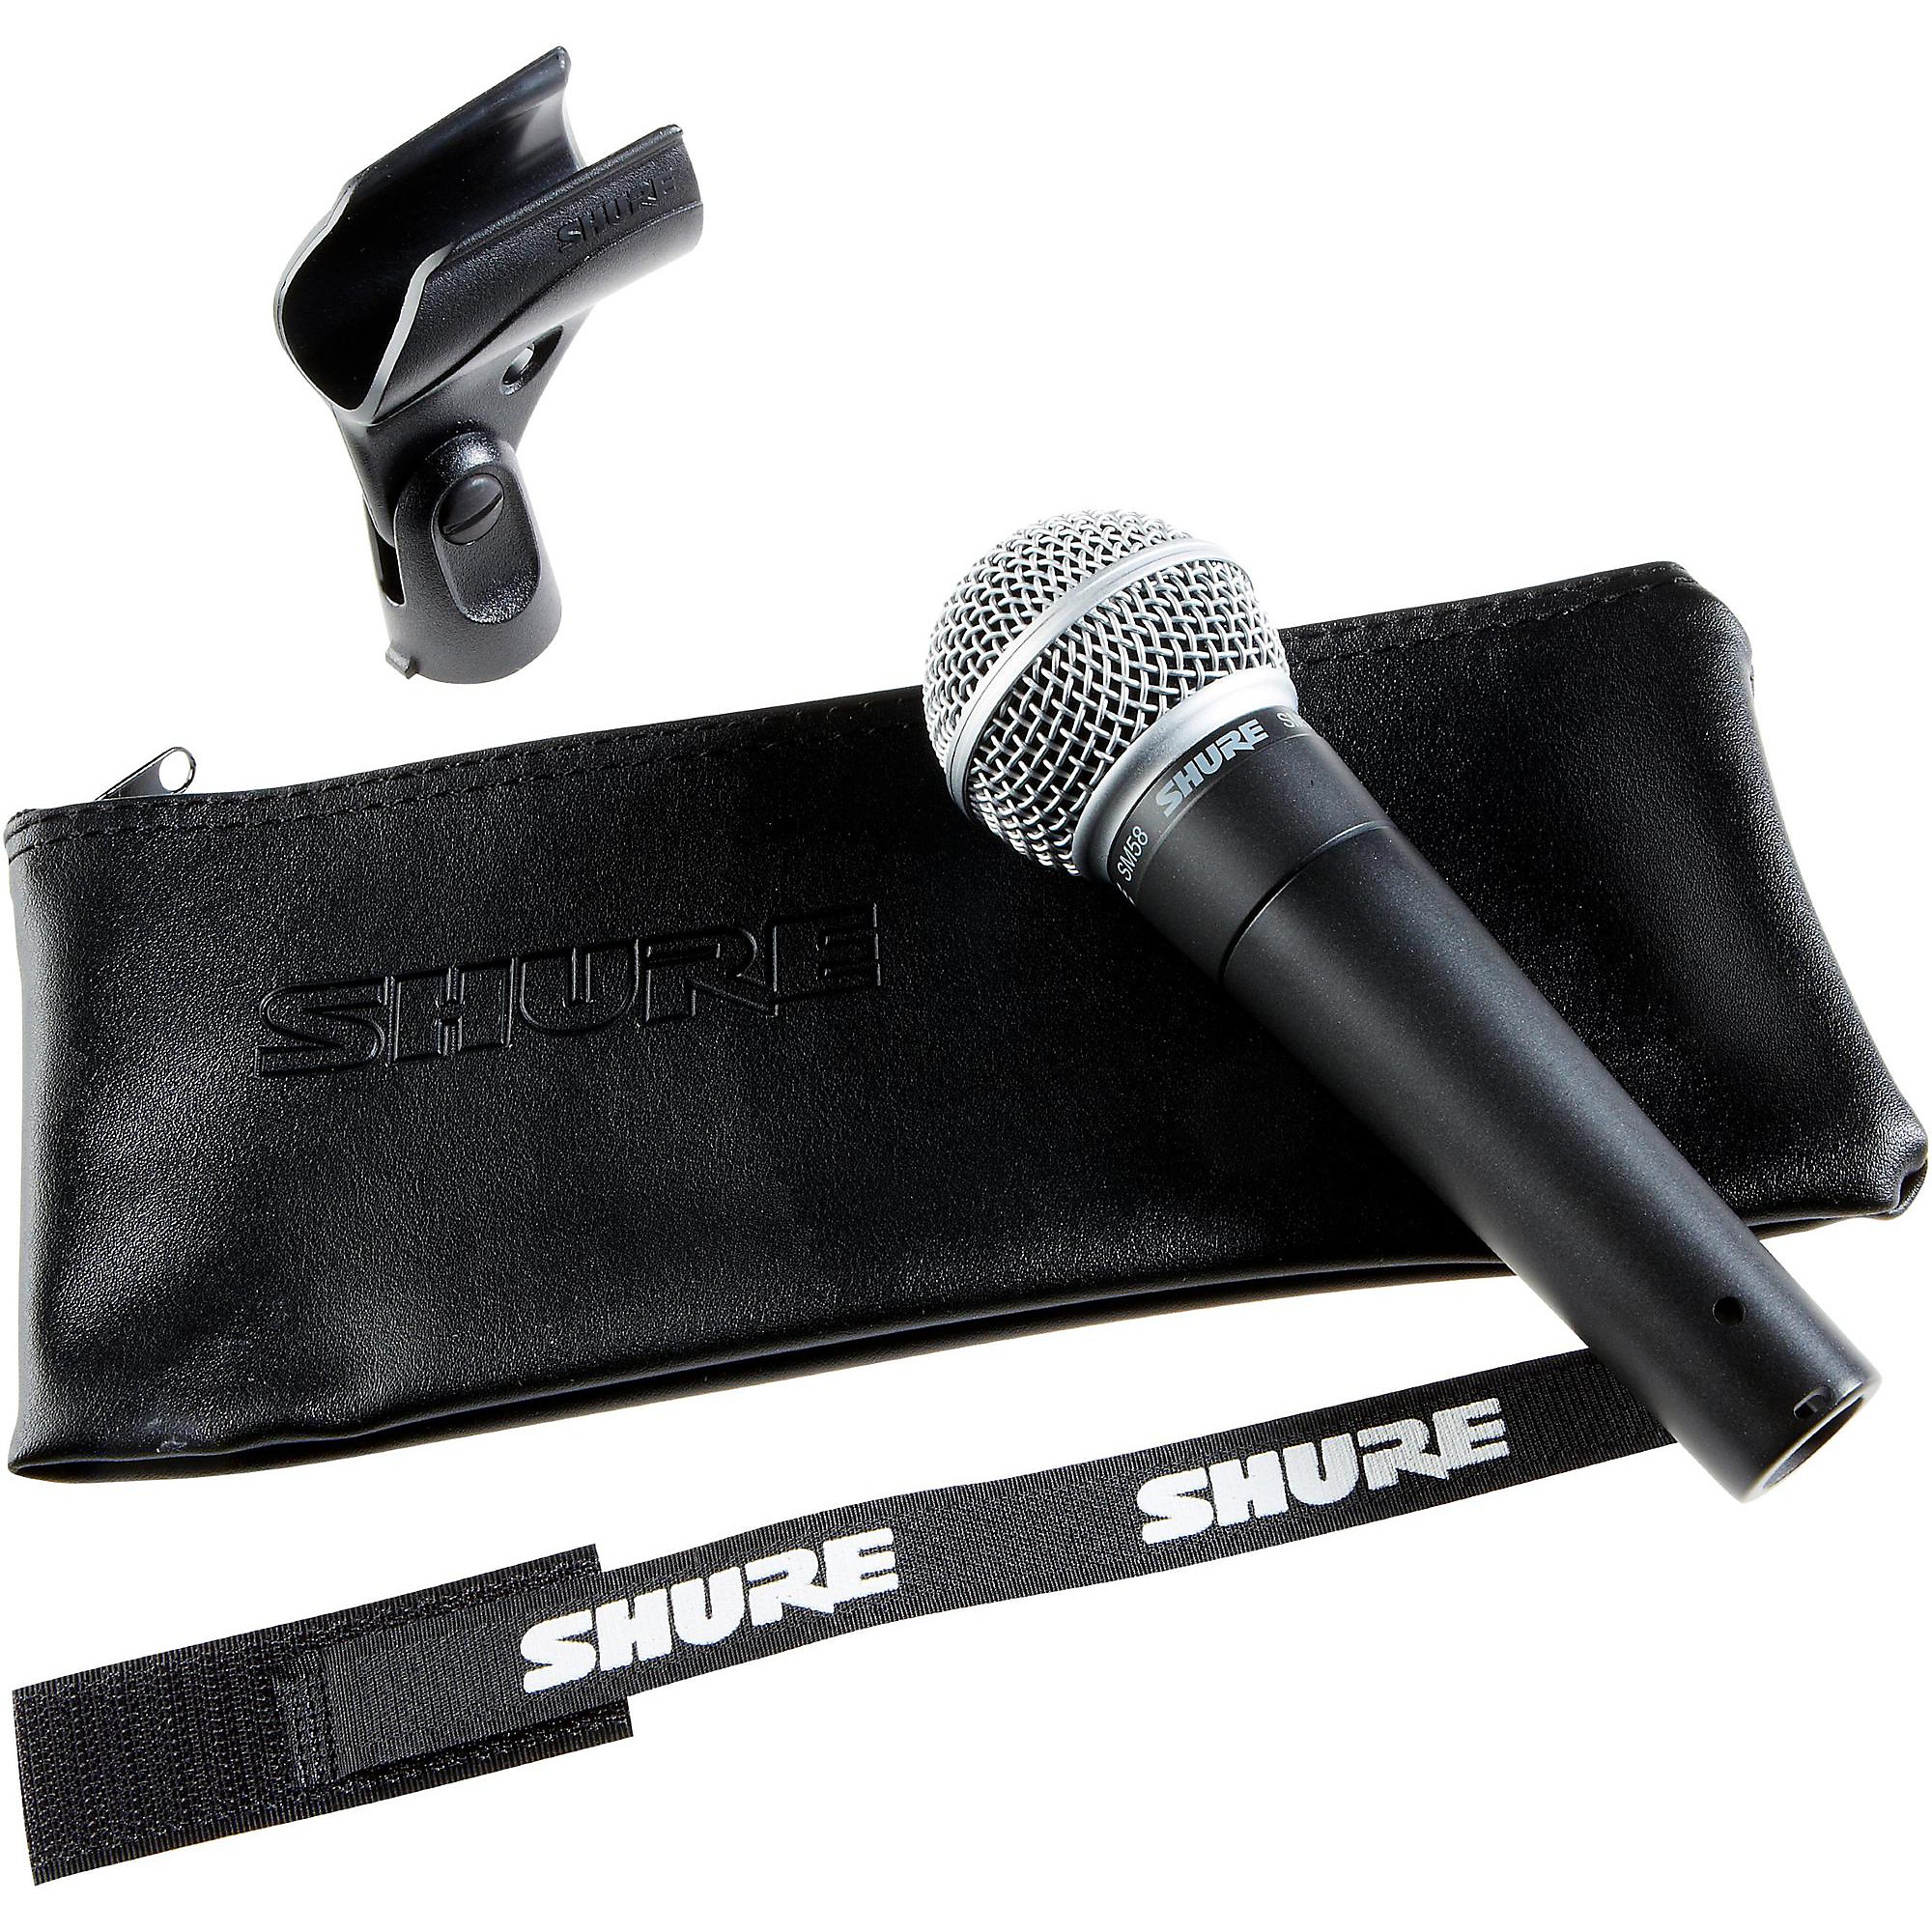 Shure SM58-LC Cardioid Dynamic Vocal Microphone with Pneumatic Shock Mount,  Spherical Mesh Grille with Built-in Pop Filter, A25D Mic Clip, Storage